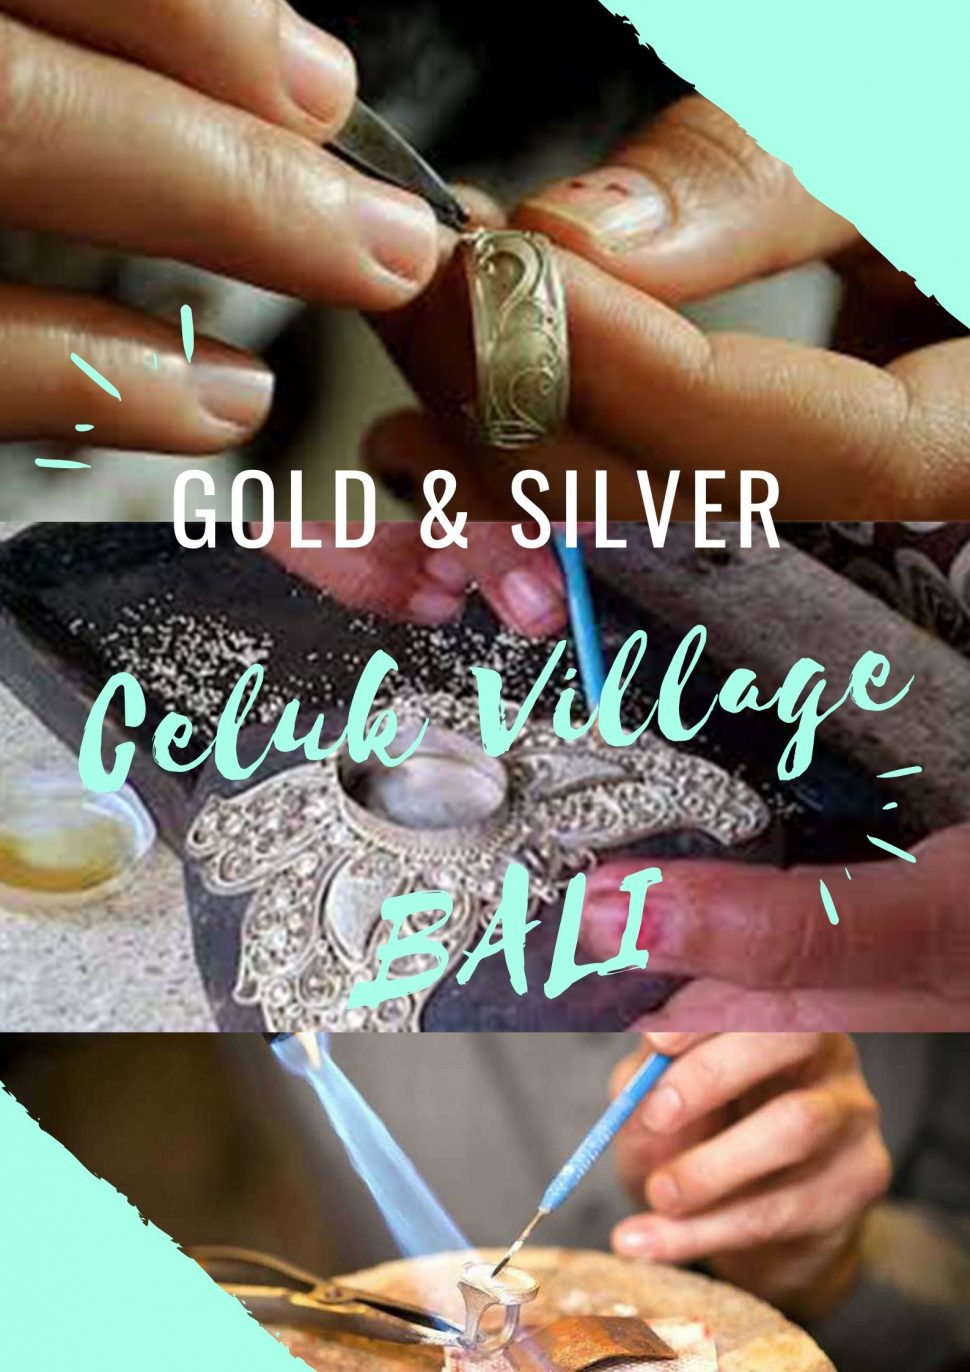 Celuk Village For Traditional Gold And Siver Art In Bali